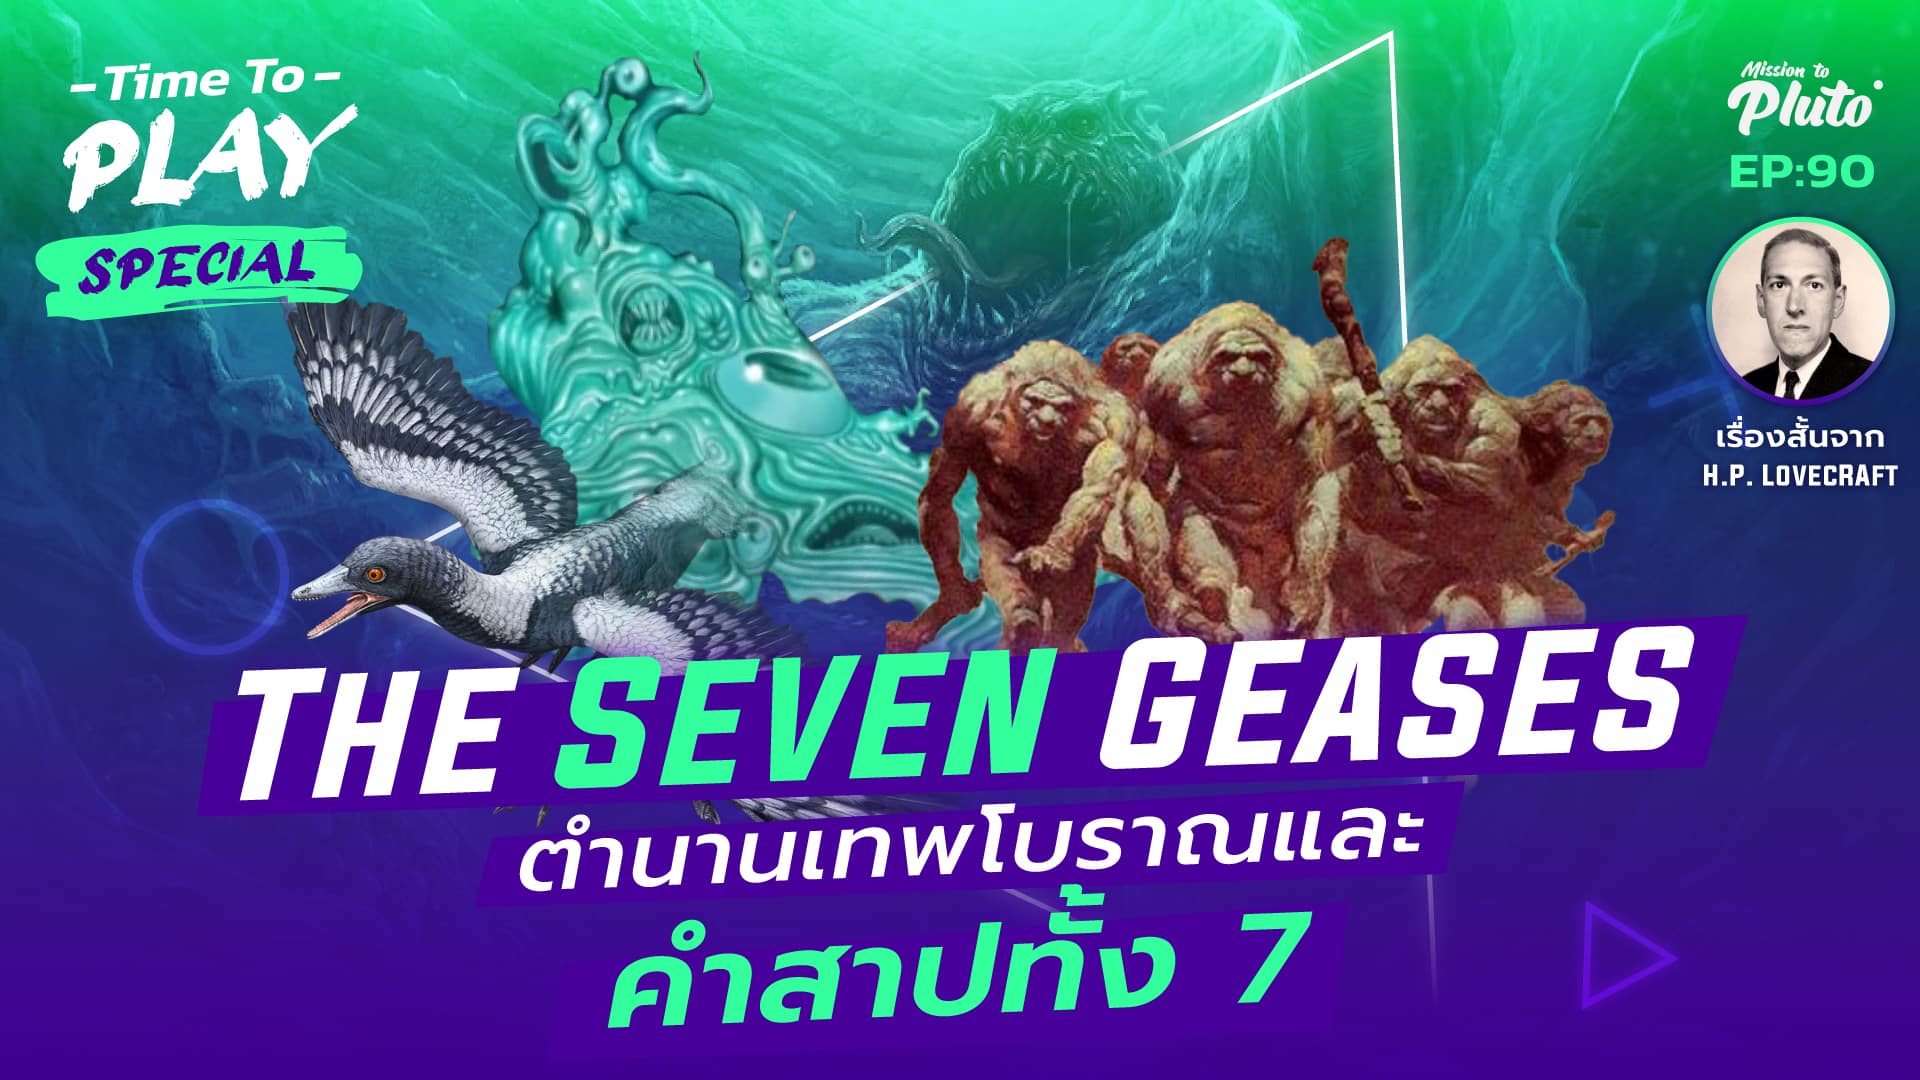 H.P. Lovecraft : The Seven Geases ตำนานเทพโบราณและคำสาปทั้ง 7 | Time To Play EP.90